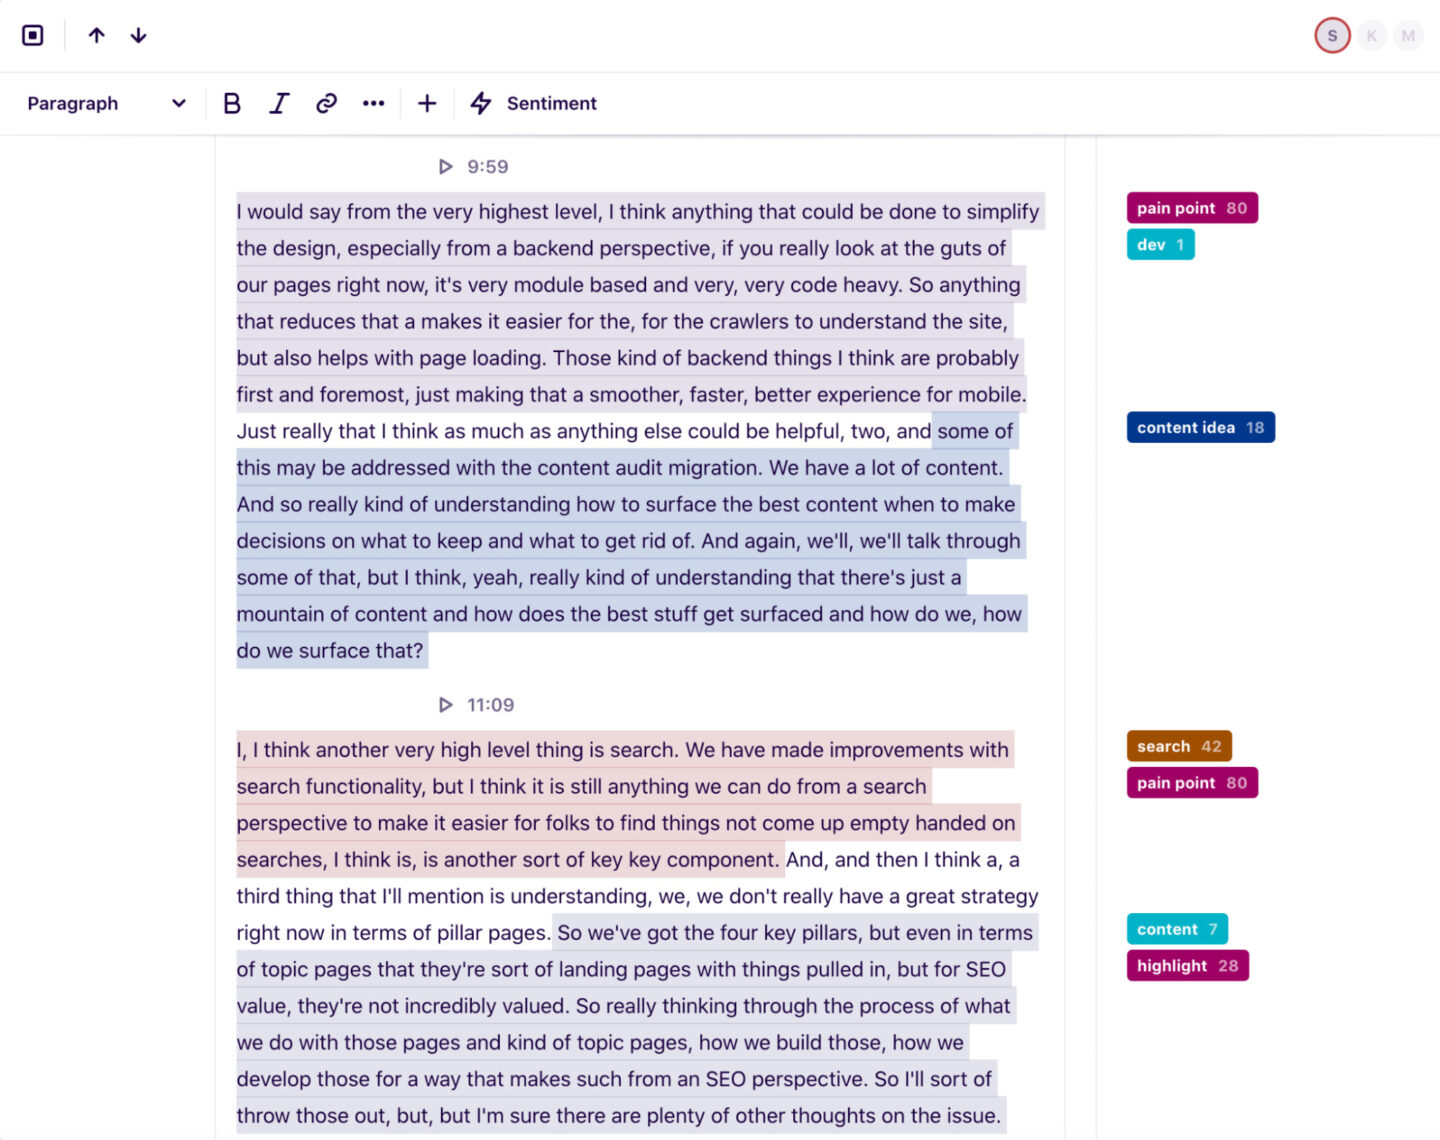 A transcript in Dovetail tagged with key highlights